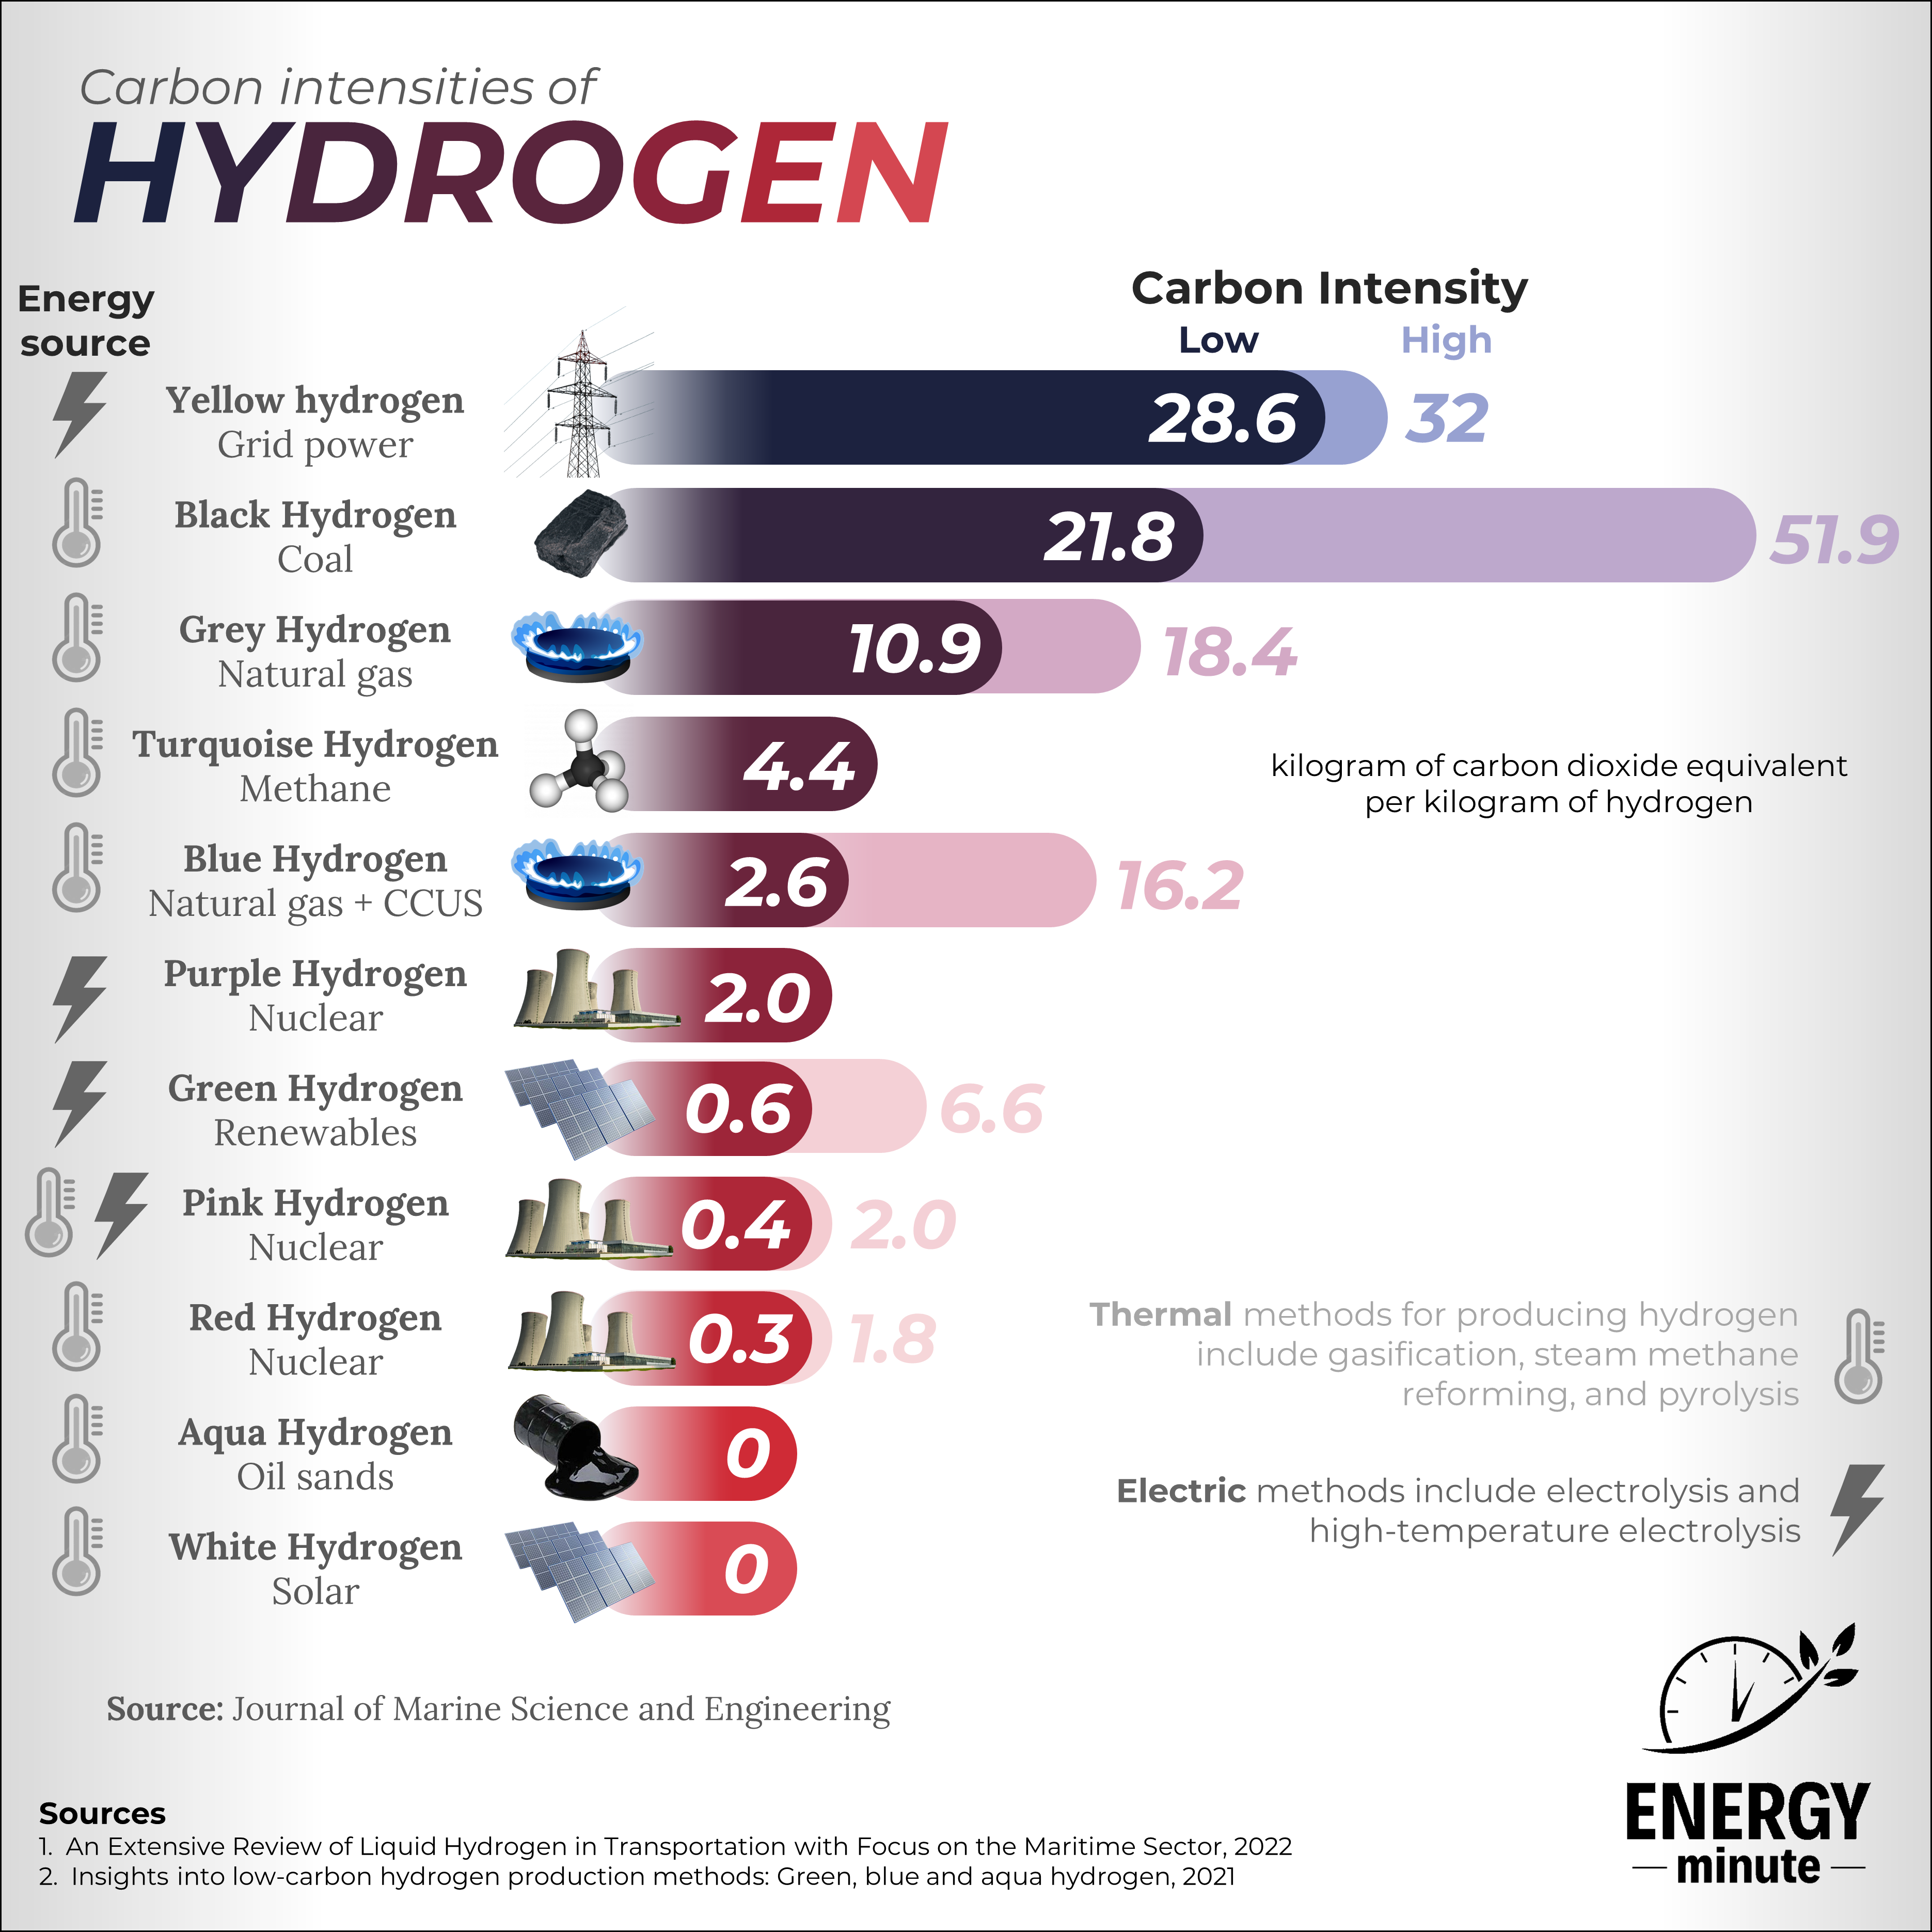 Carbon intensities of different types of hydrogen